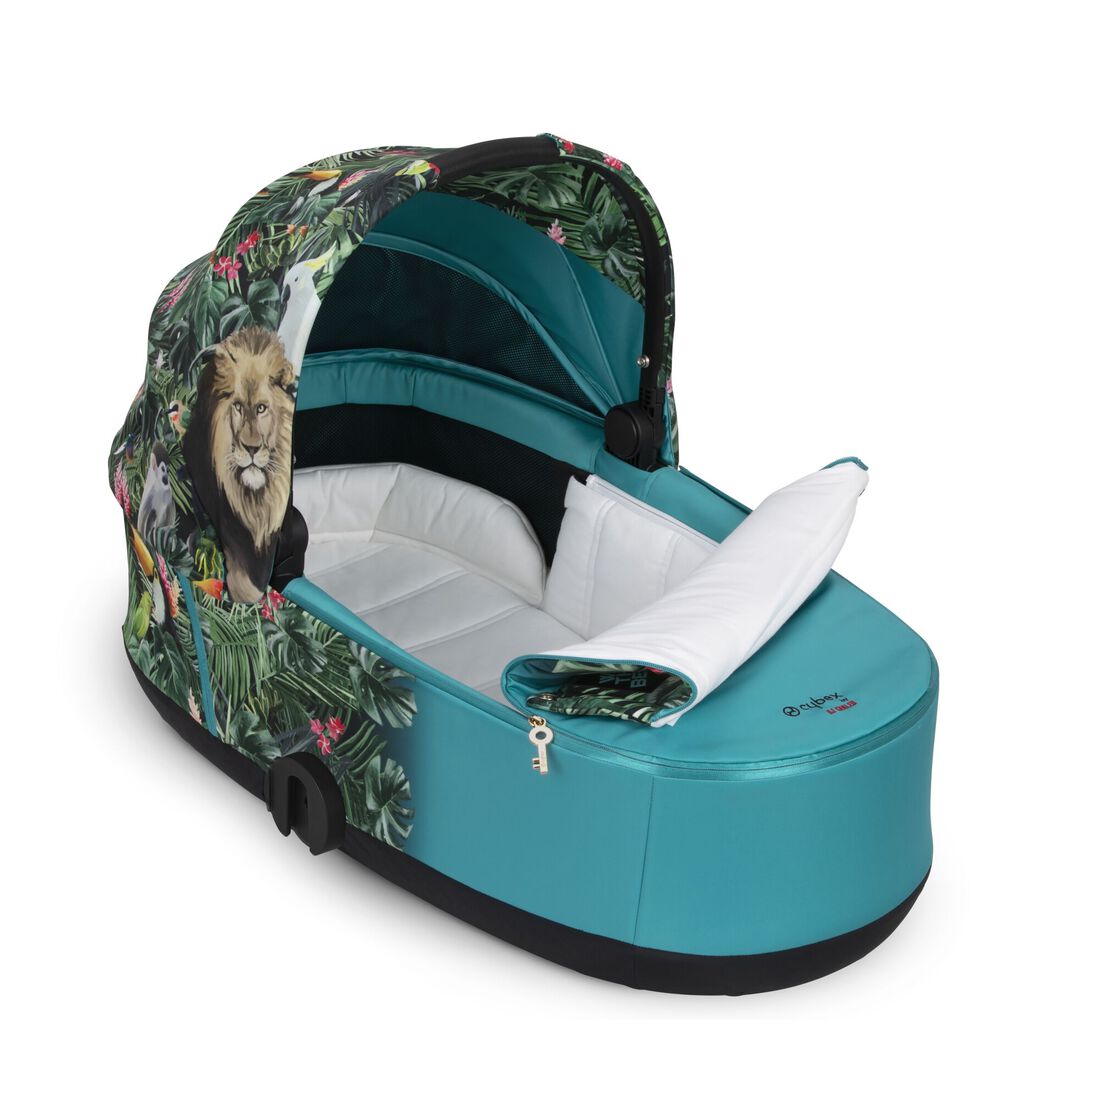 Navicella Mios Lux Carry Cot_ Collezione “We the Best” by DJ Khaled